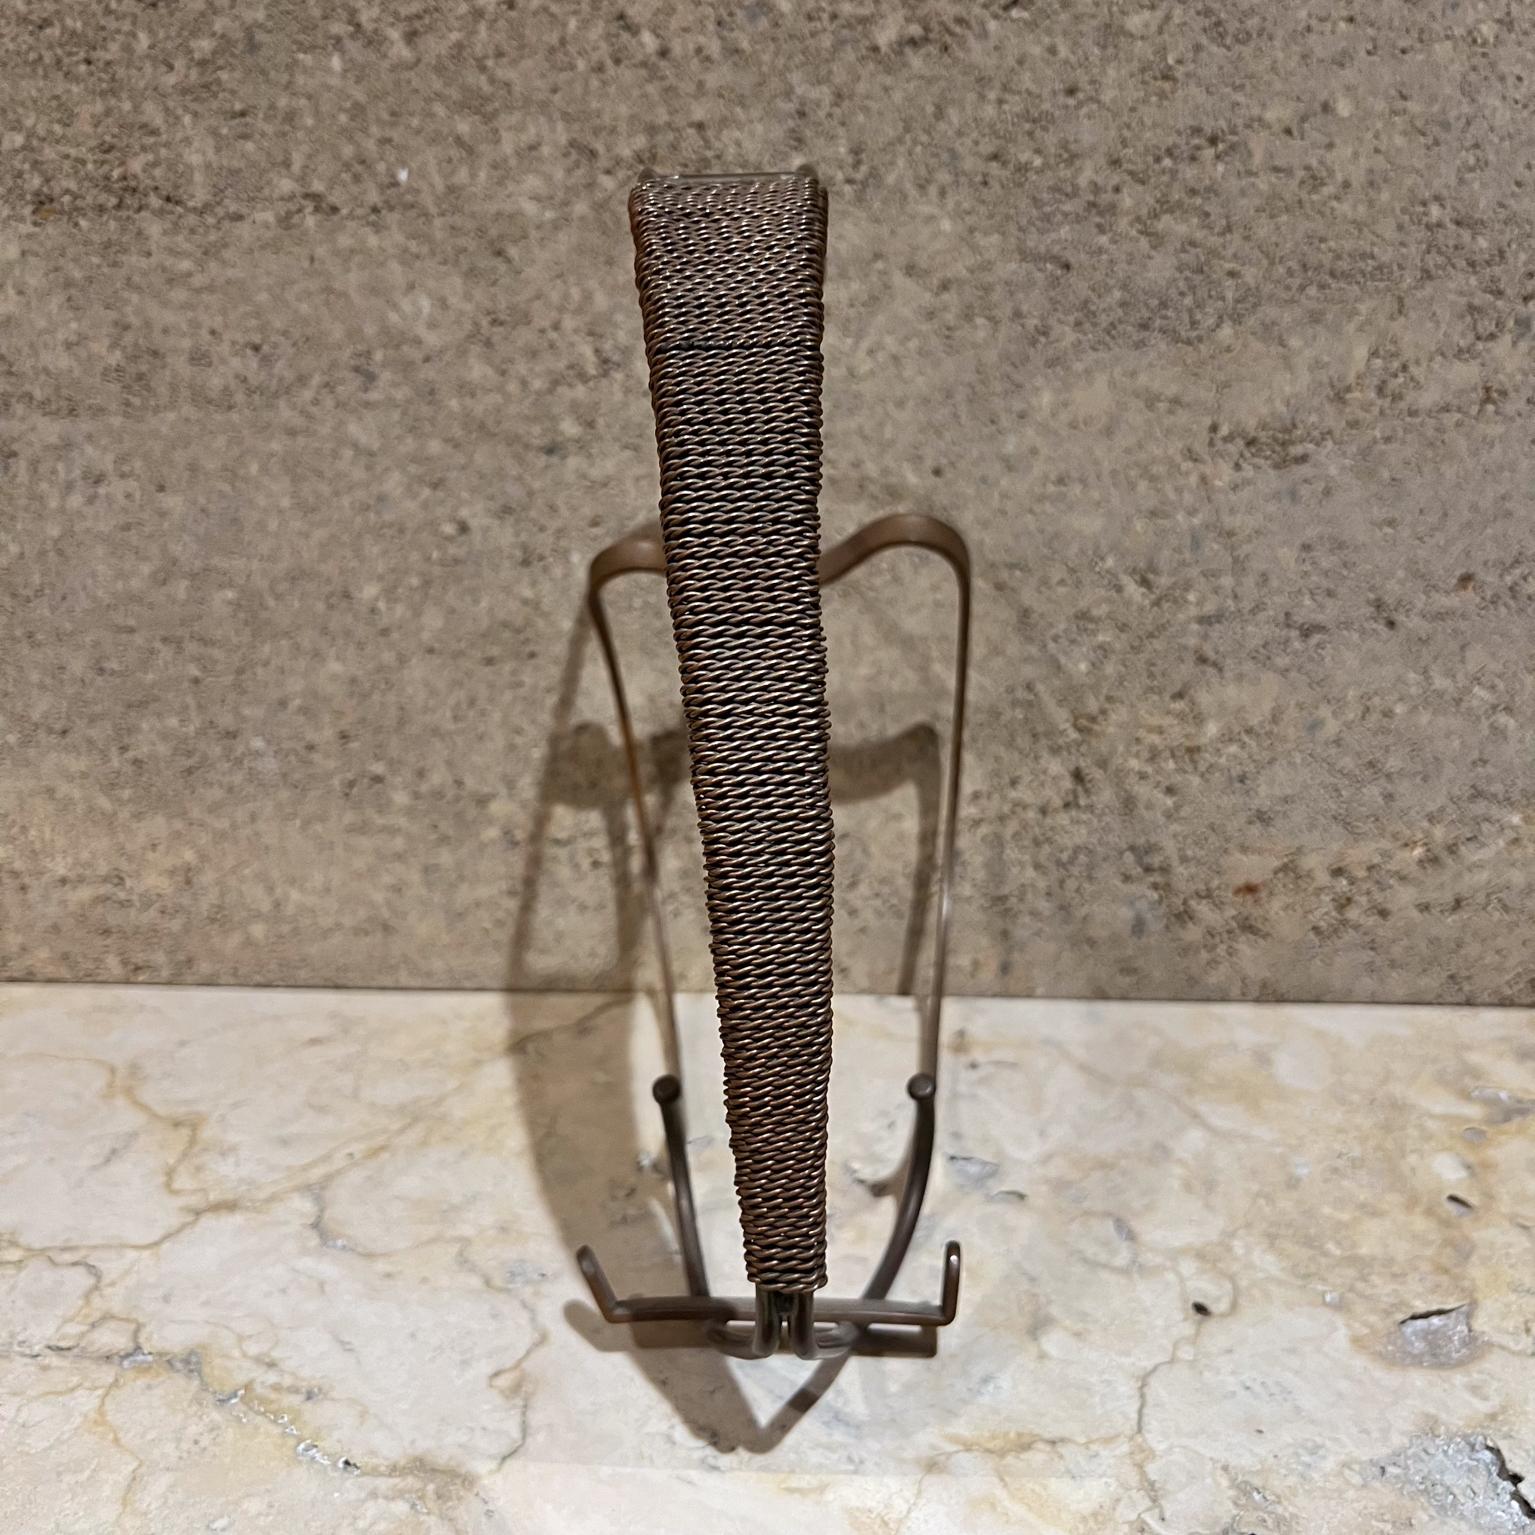  1960s French Art Deco Sculptural Wine Bottle Holder Woven Copper In Good Condition For Sale In Chula Vista, CA